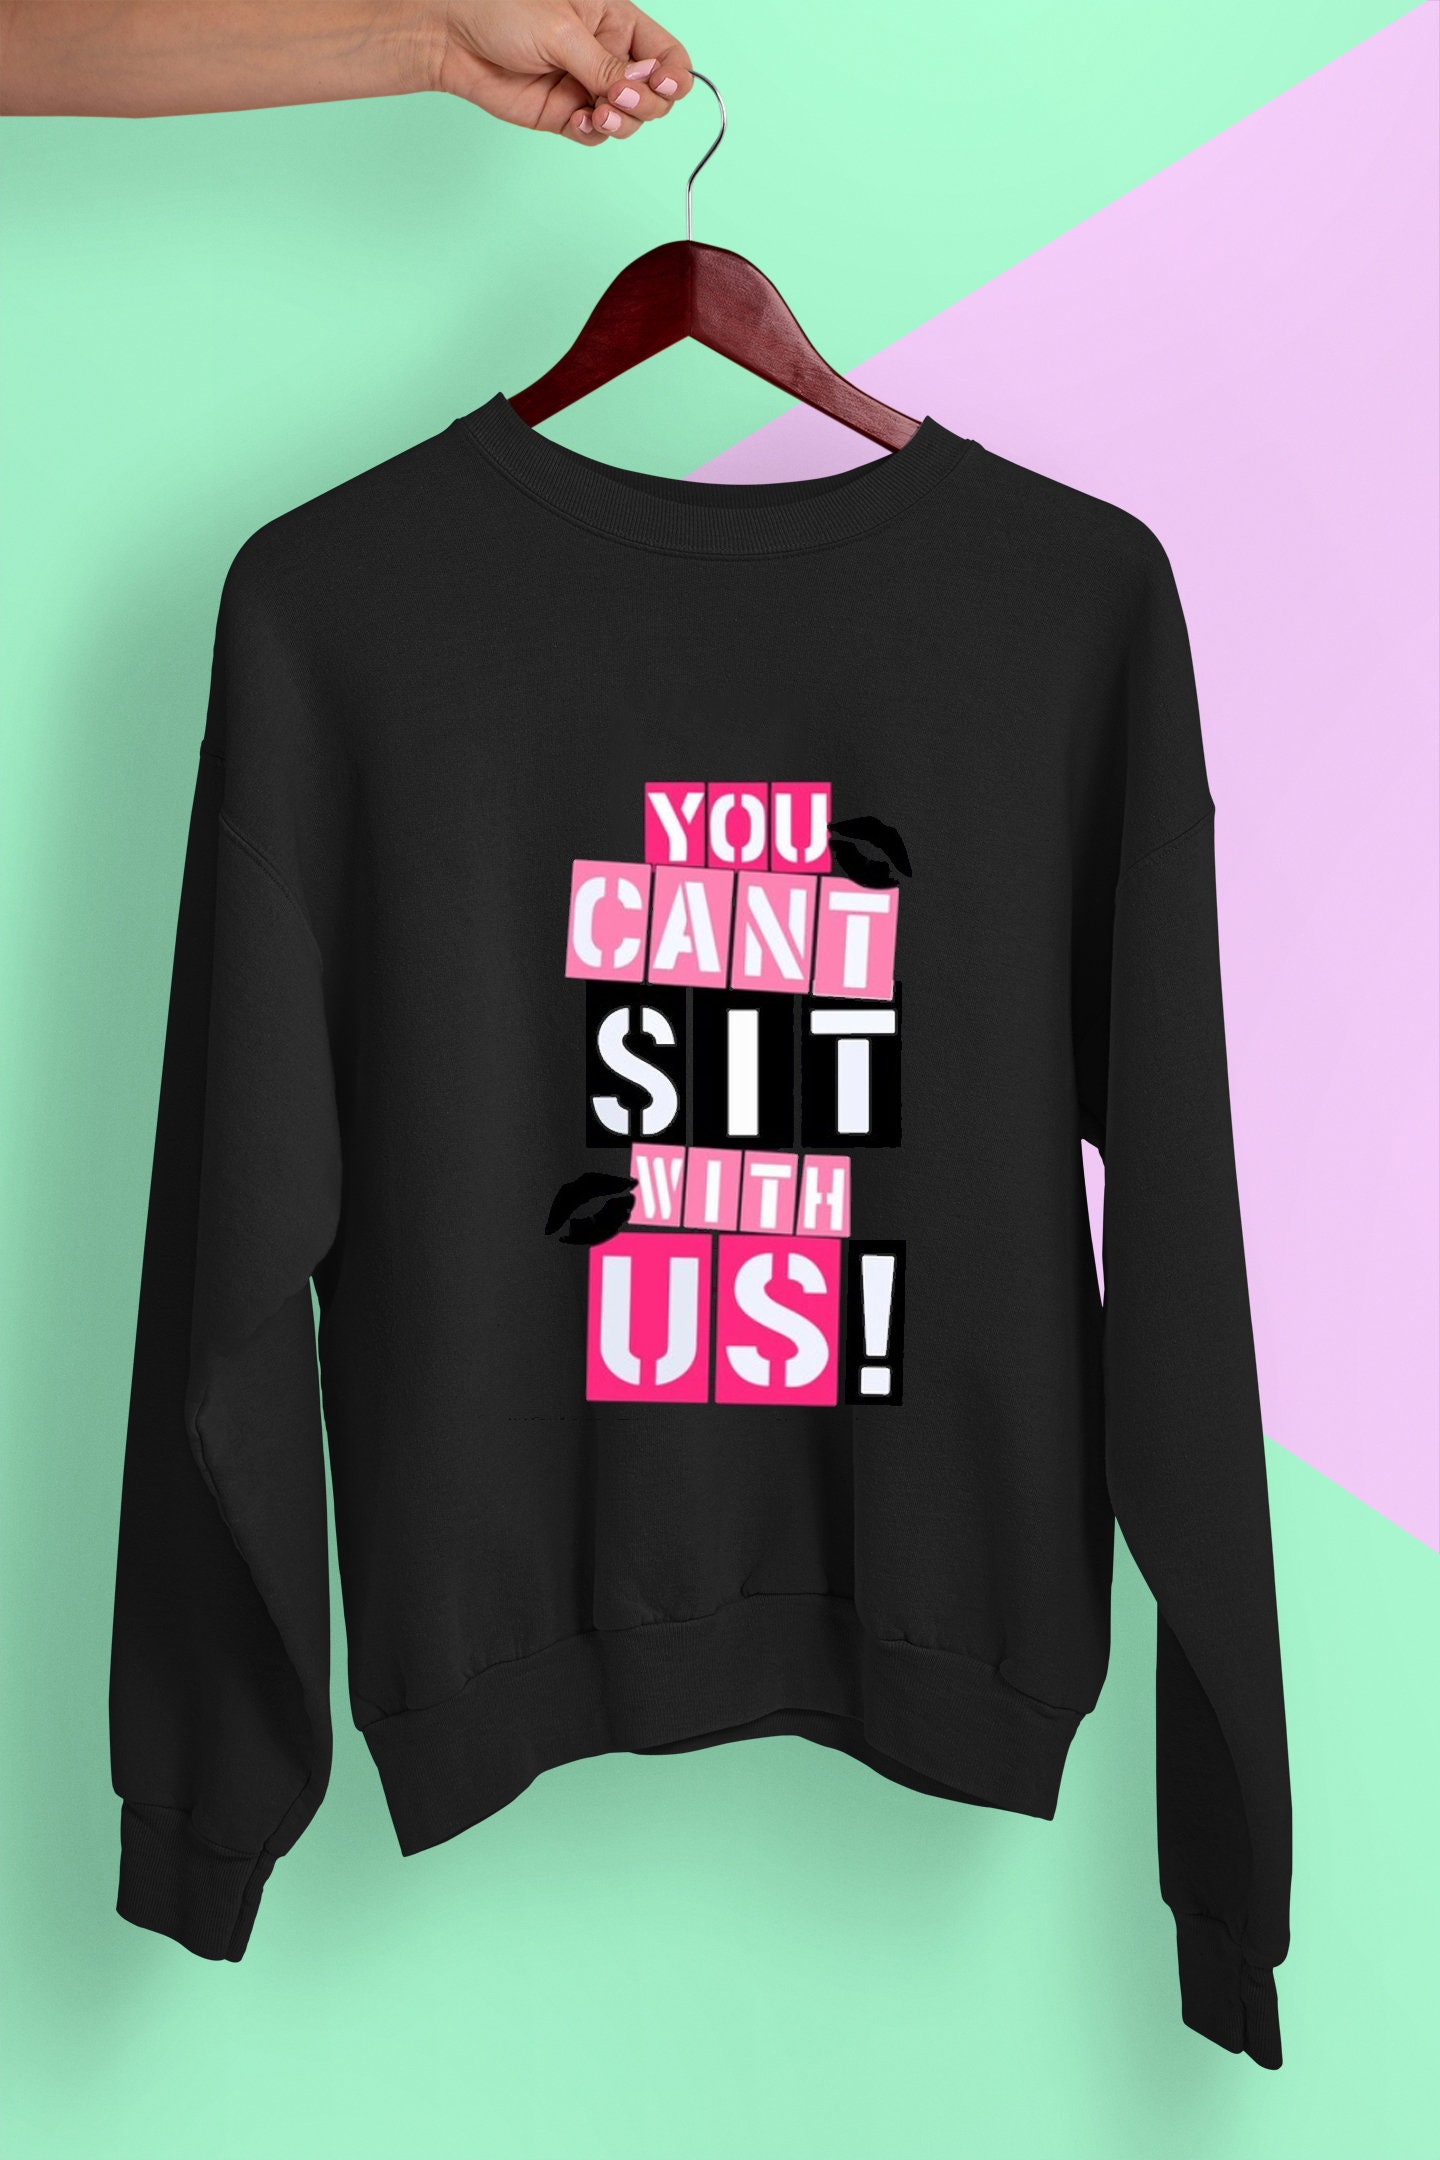 Mean Girls You Can't Sit With Us Hoodie Size S-XXL – Mpcteehouse